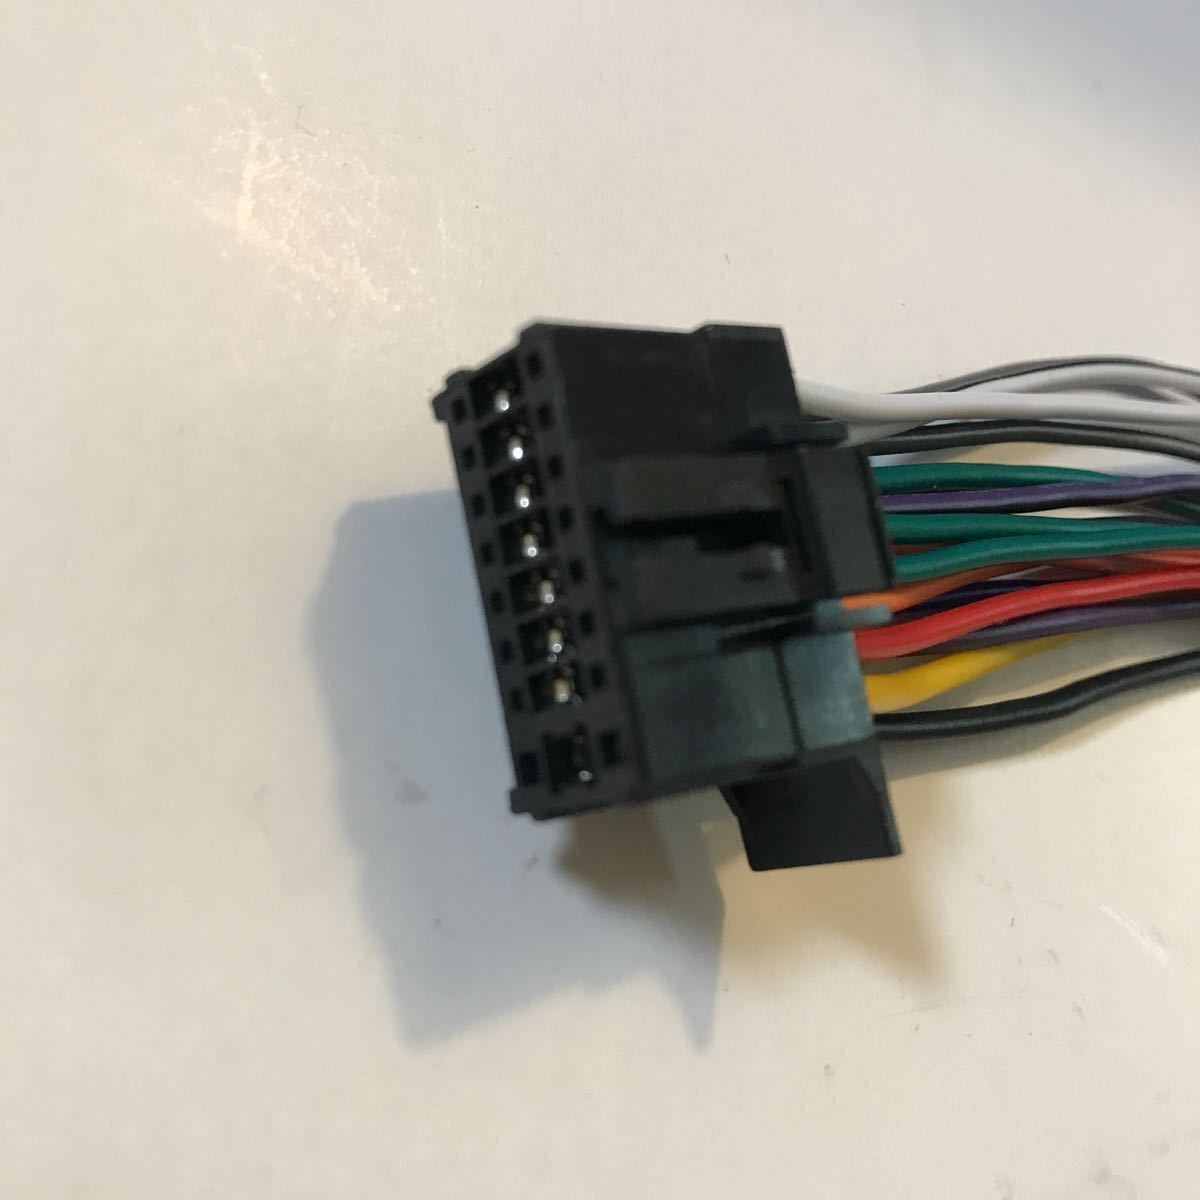 RD-N001 interchangeable new goods Carozzeria 16P power supply cable audio Harness power supply Harness AVIC-RW99 AVIC-RZ99 AVIC-RZ77 AVIC-RZ55 RD-N002